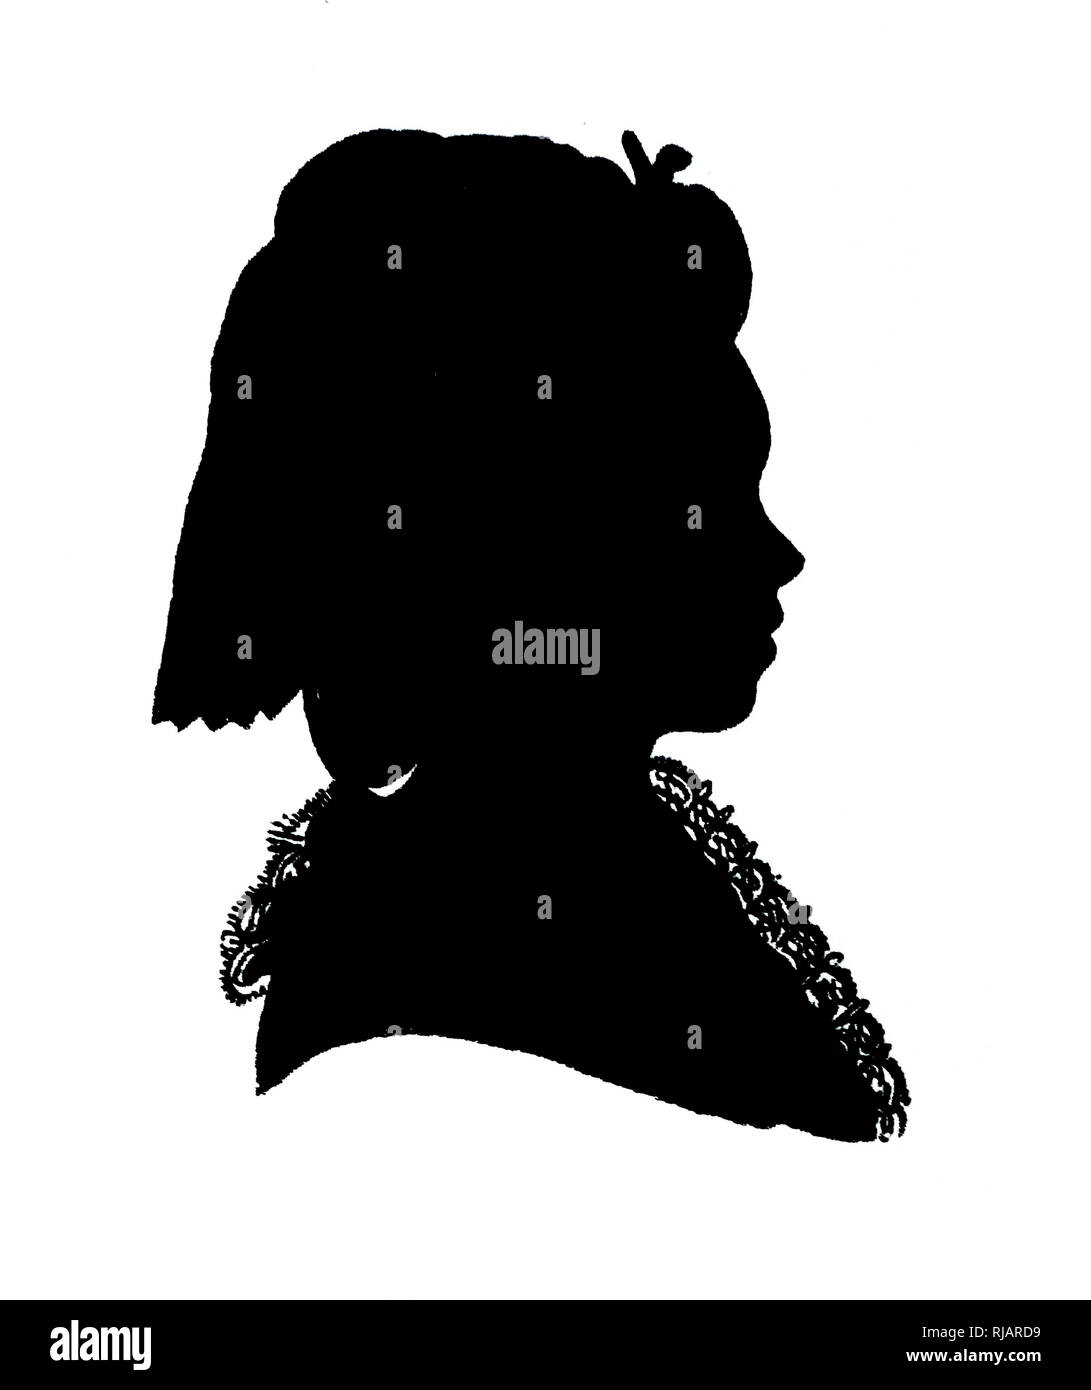 Silhouette depicting Anna Barbara von Molk (1752–1823), daughter of Court Chancellor Felix von Molk.  Mozart was in love with her. Wolfgang Amadeus Mozart (1756 – 1791), was a prolific and influential composer of the Classical era. Stock Photo